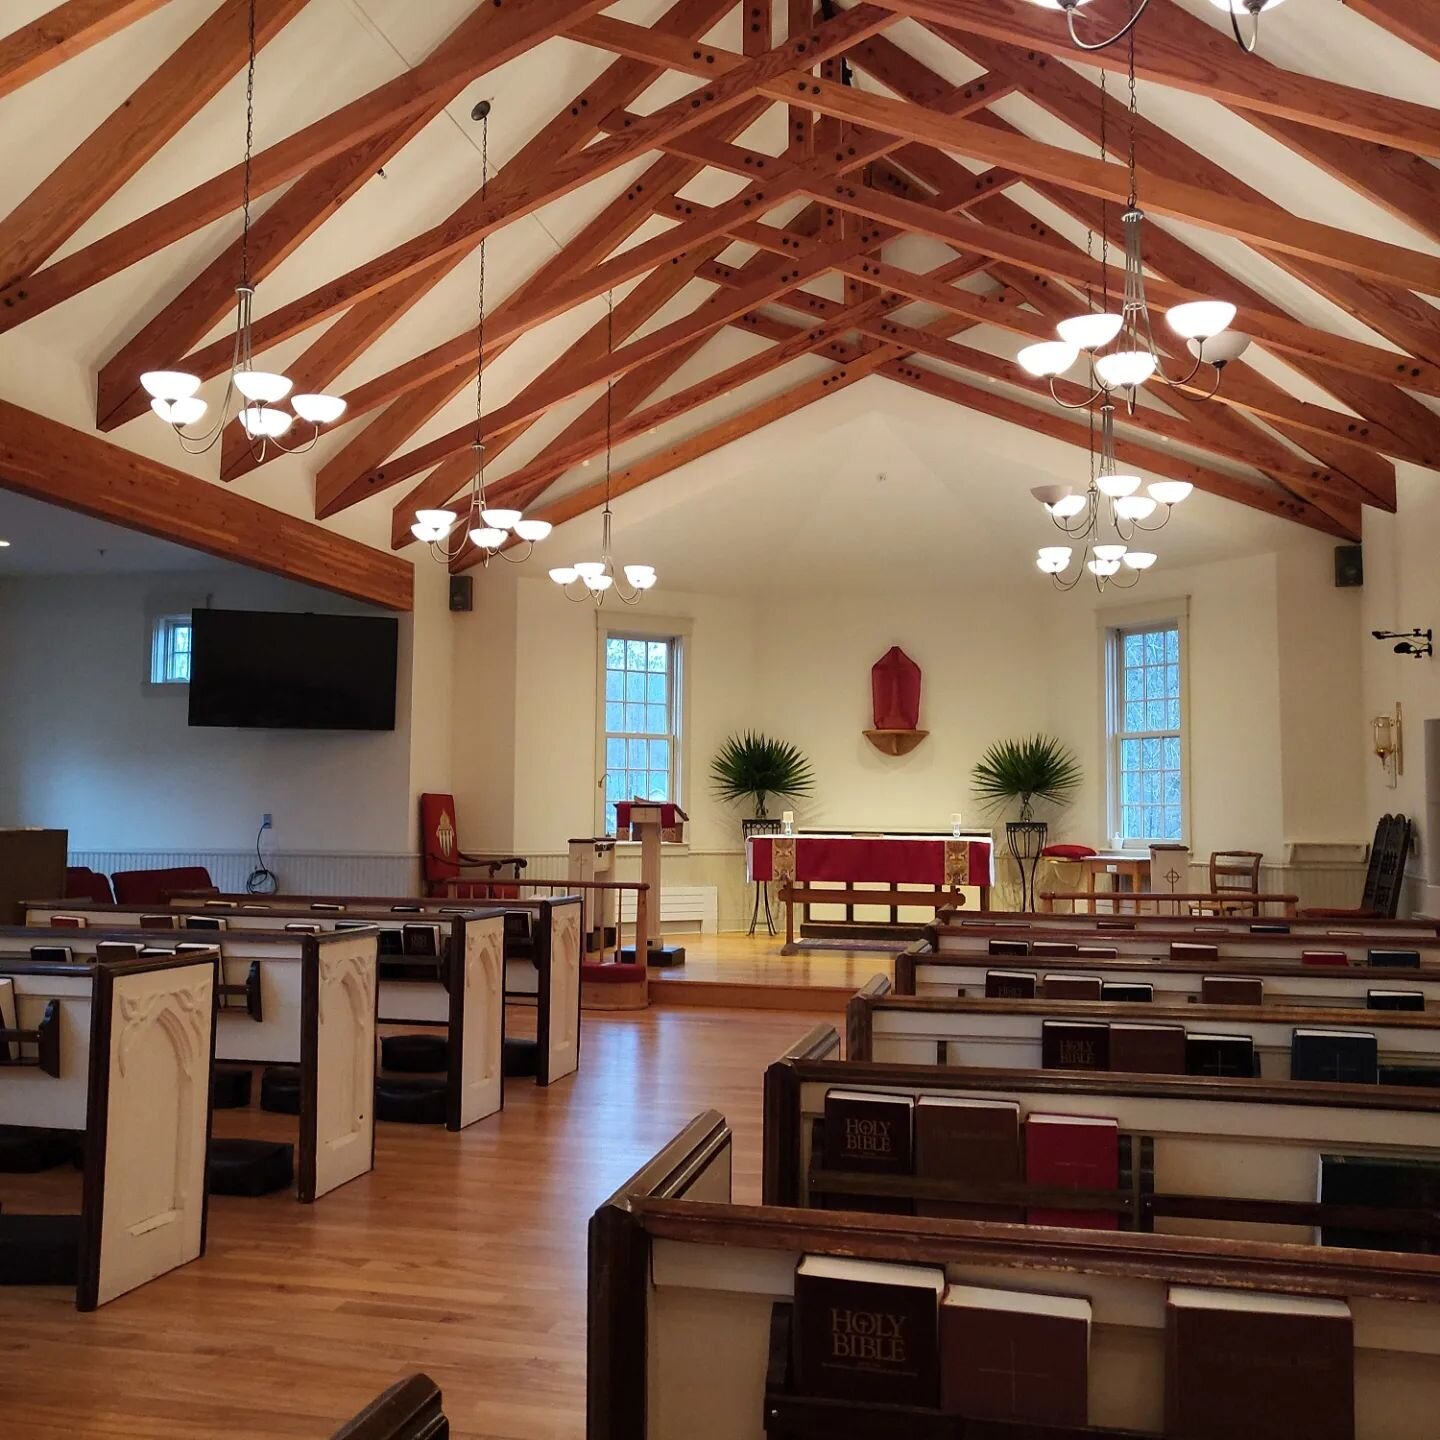 St John's is walking into the future. Whether you live across the street, across the country or across the world,  you can participate in worship of St. John's.  Check out today's installation pictures. 

#stjohnsstowe #episcopalchurch #episcopaldioc